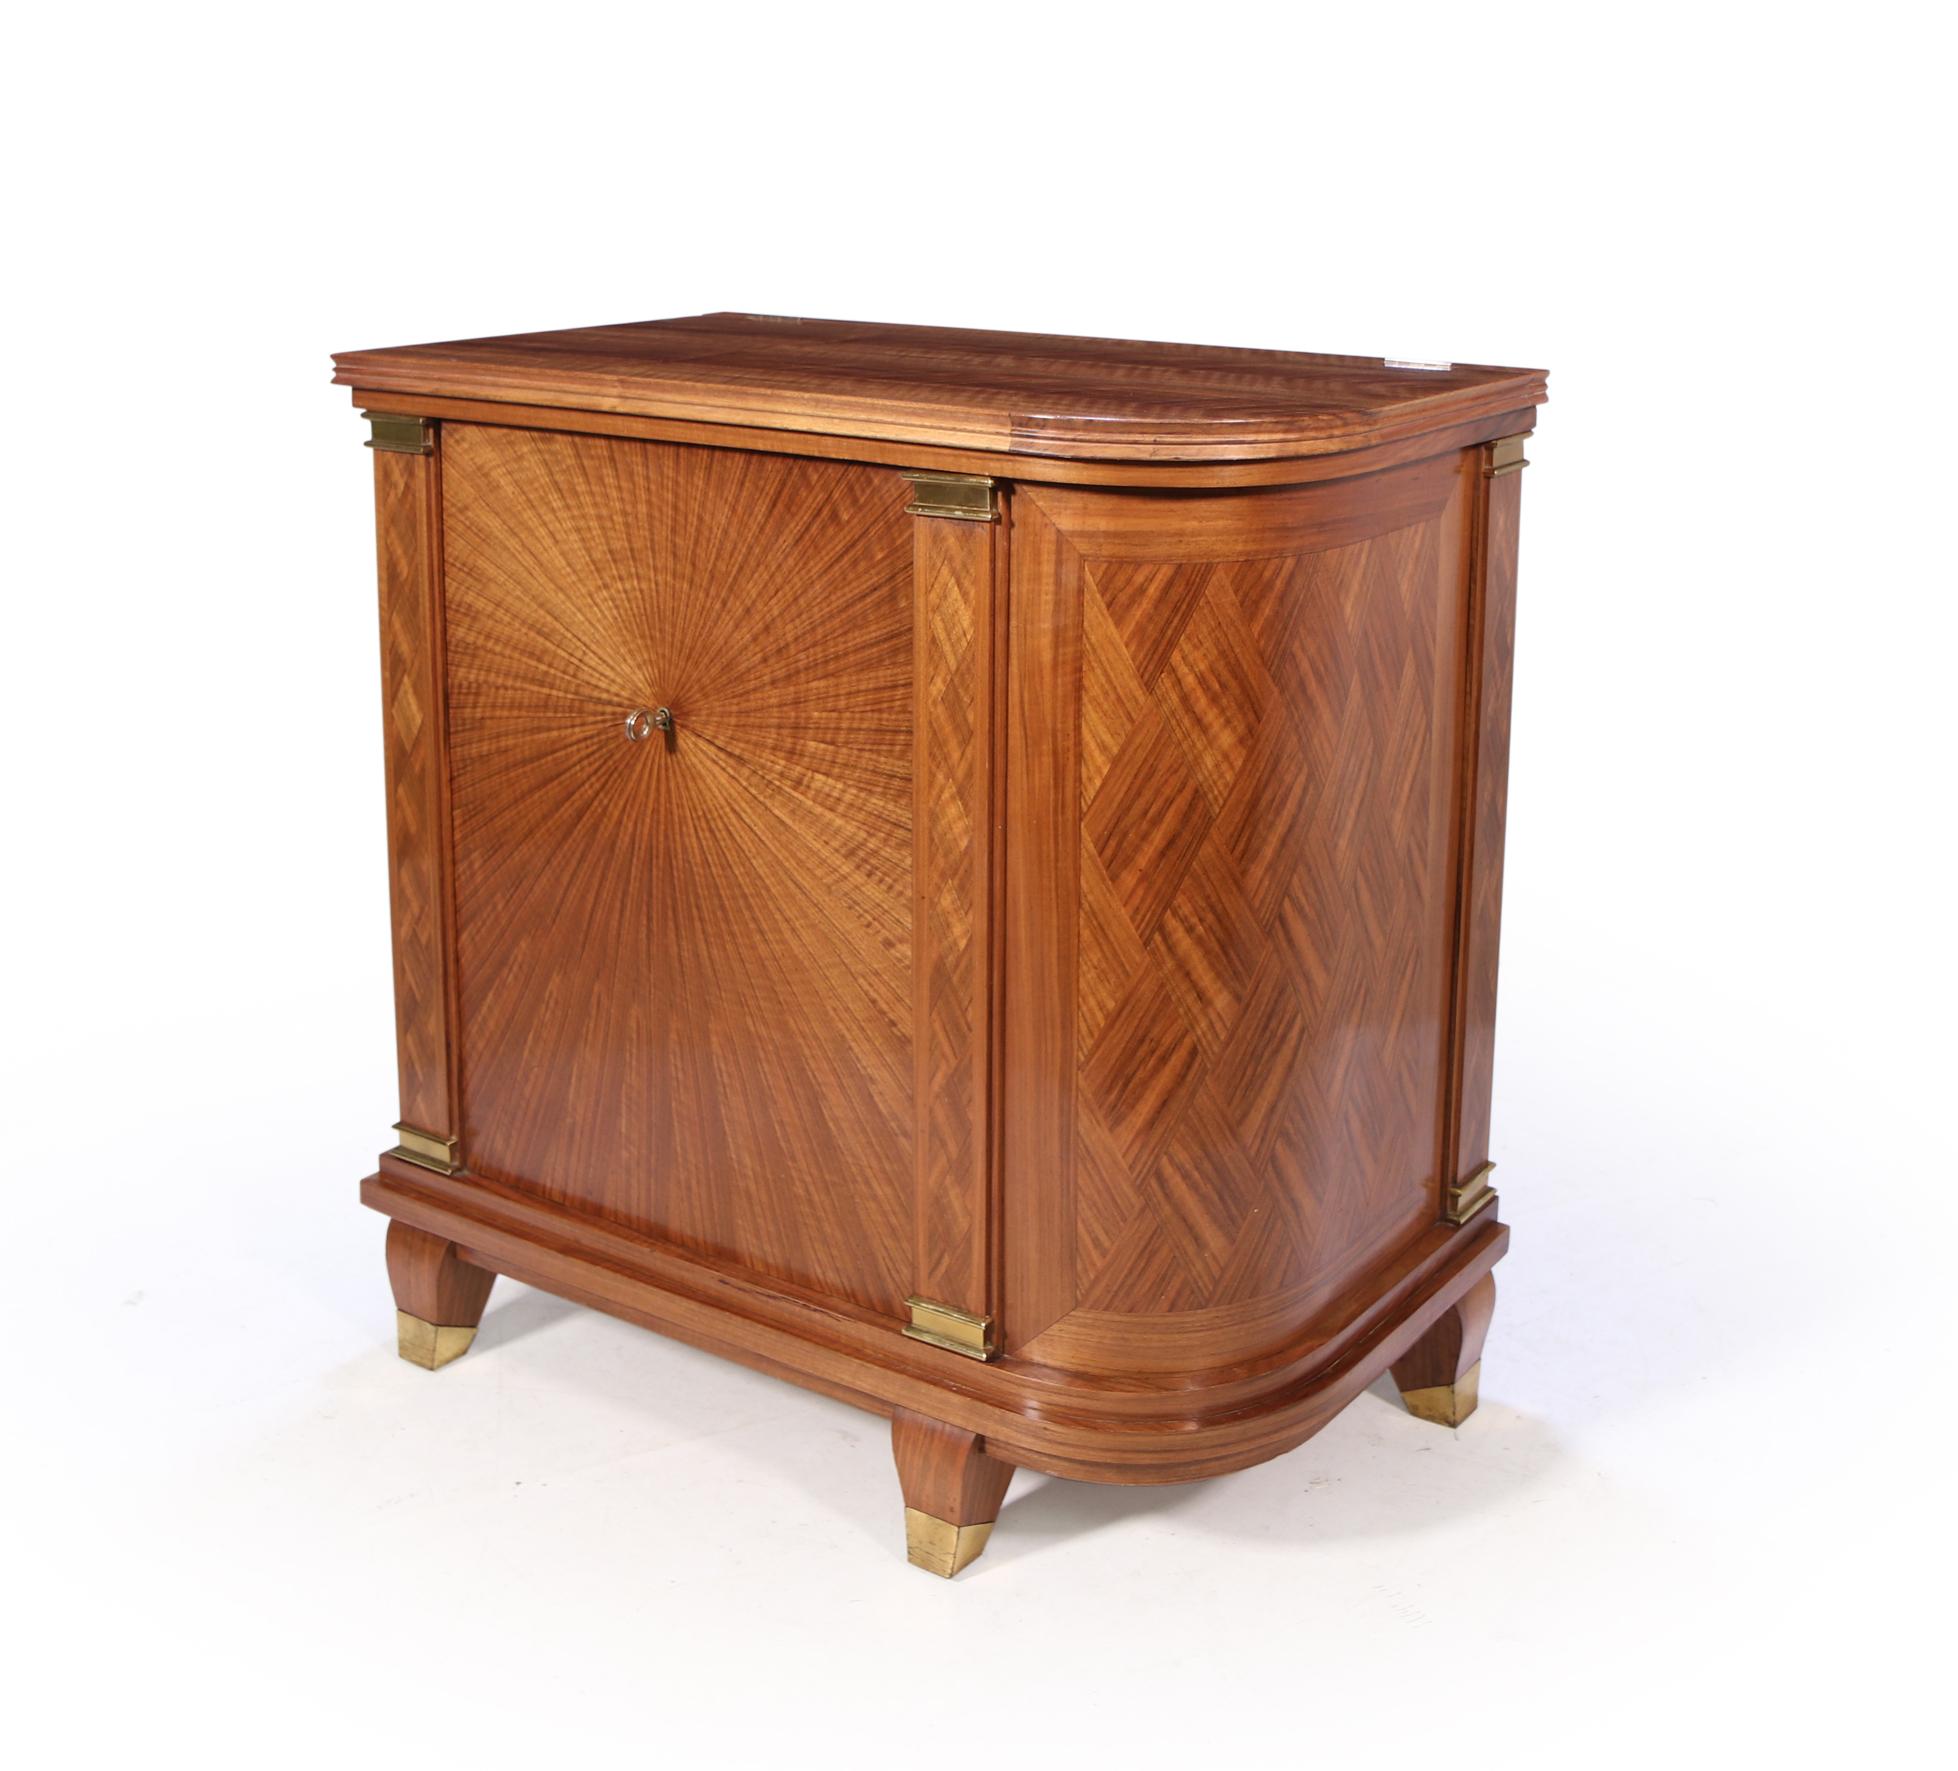 An exceptionally good quality French art deco cocktail cabinet, solid walnut and in parquetry walnut veneer, segmented spiral to the front with column parquetry uprights having gilt bronze fittings to either end. The lift up lid is supported when